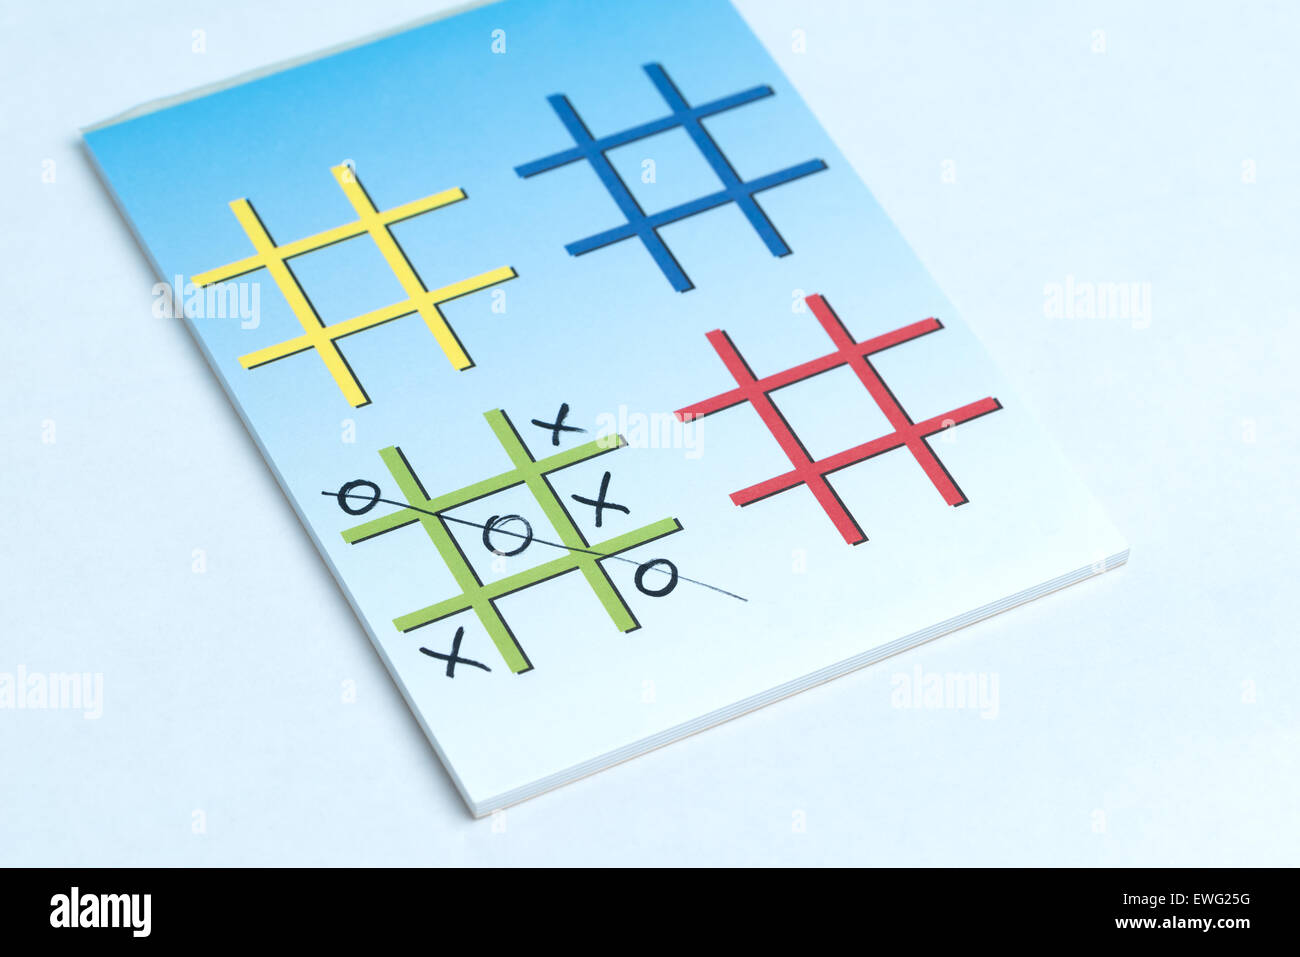 A close up of a game of Xs and Os on a note pad with colorful grids made for playing. Stock Photo